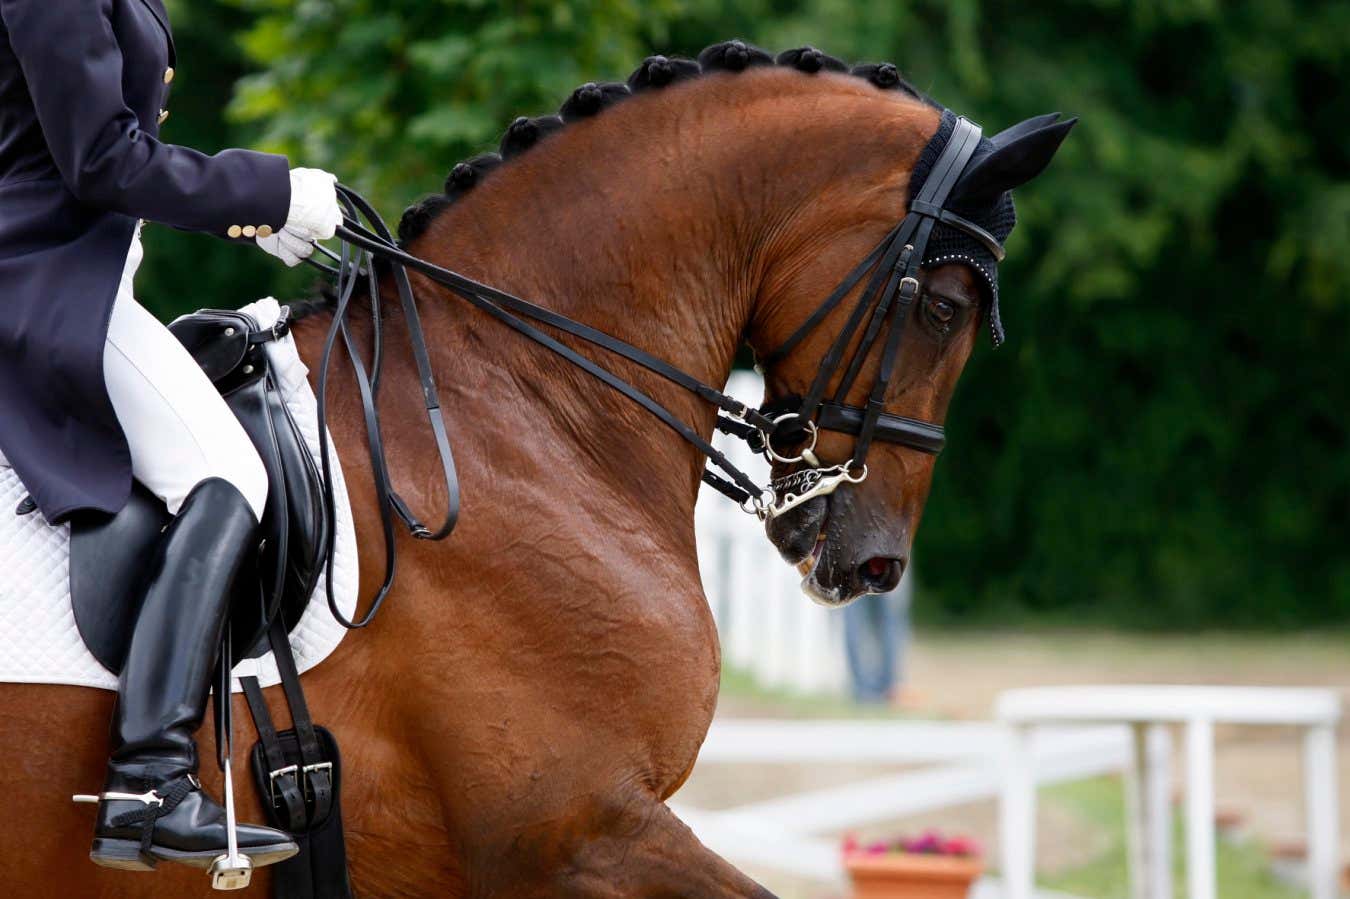 Are horses in equestrian sports being harmed by bending their necks?